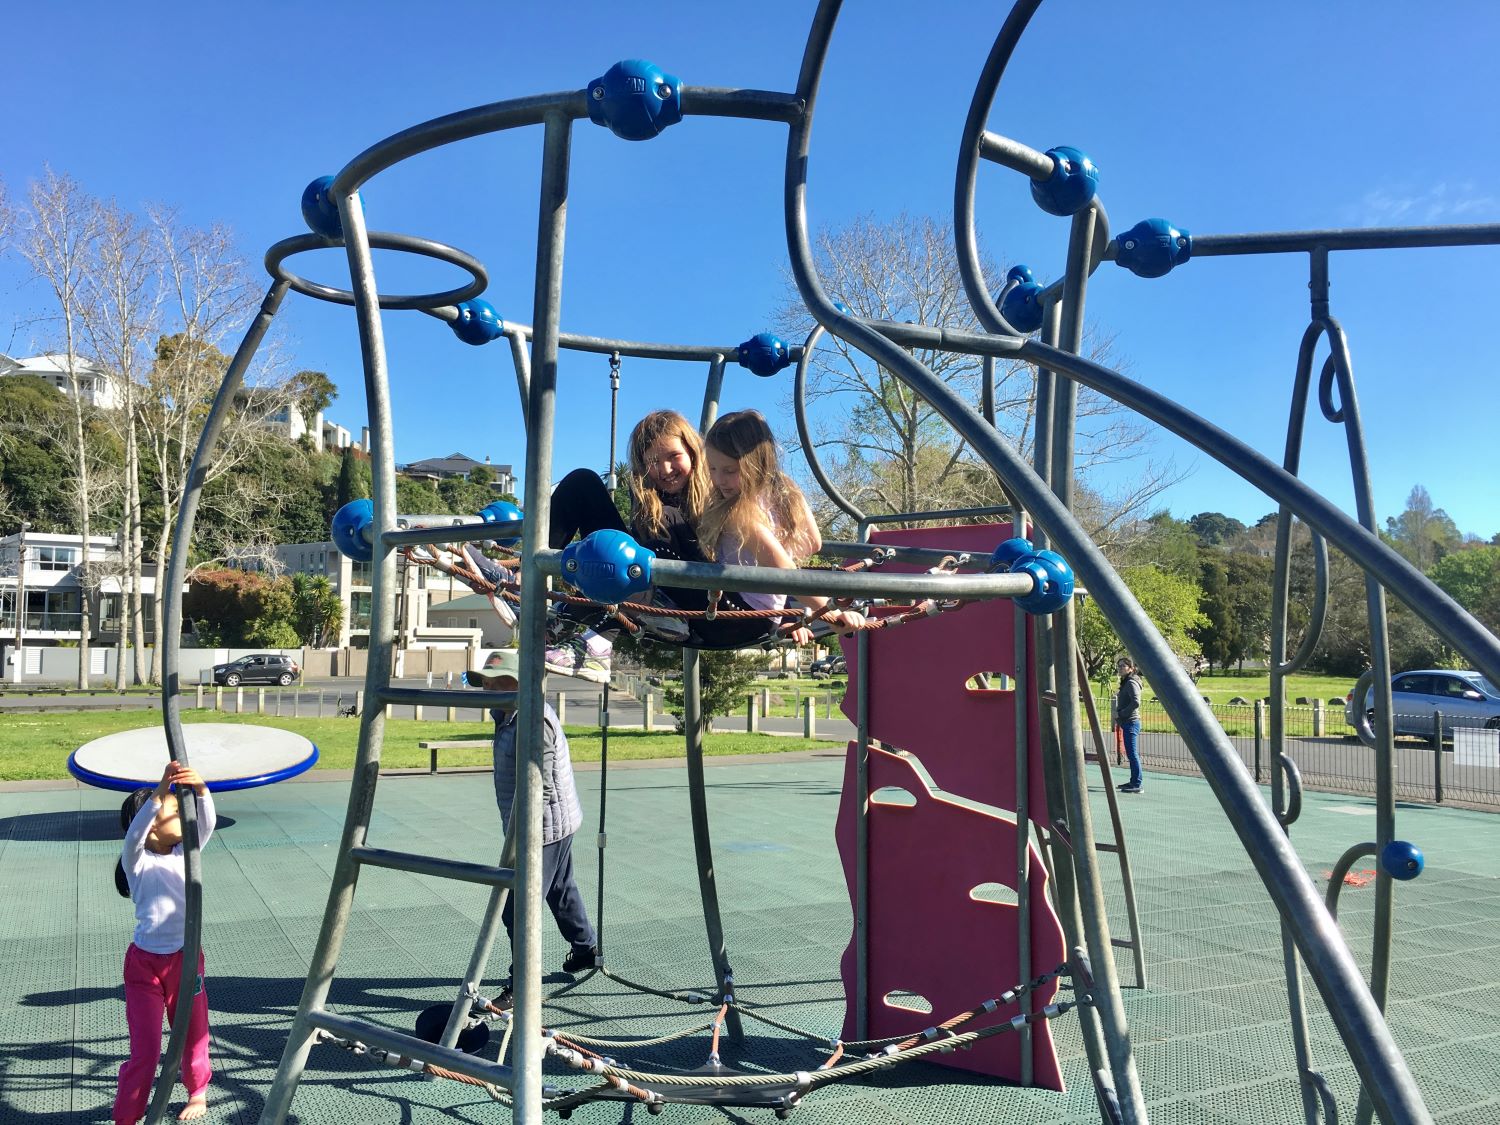 Shore Road Playground - Auckland for Kids